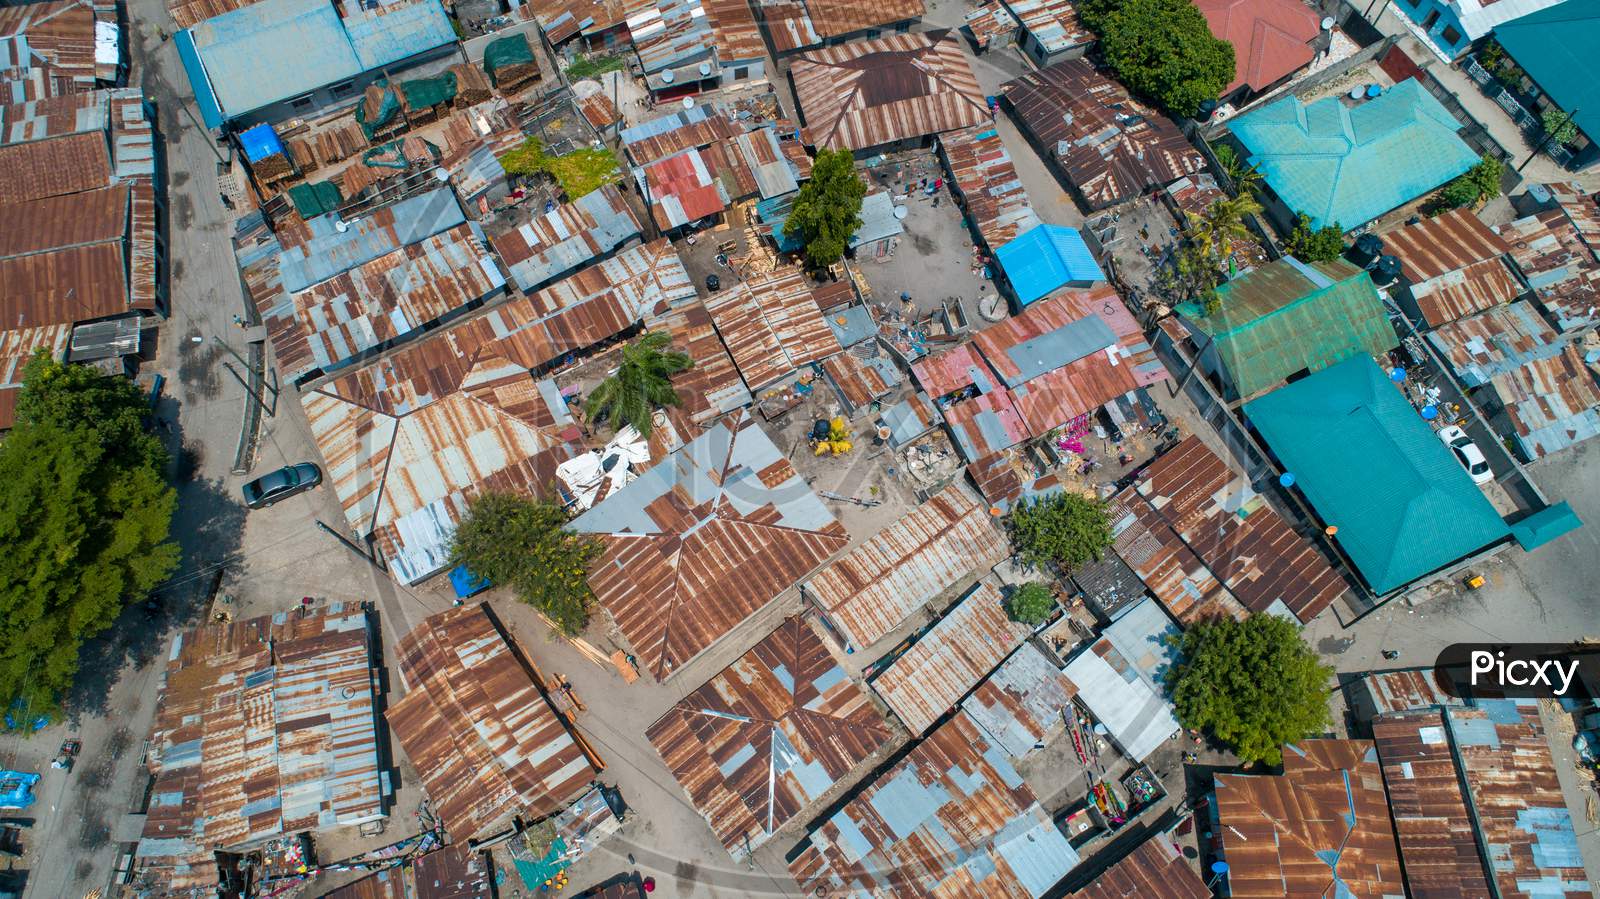 Aerial View Of The Local Settlement In Dar Es Salaam.